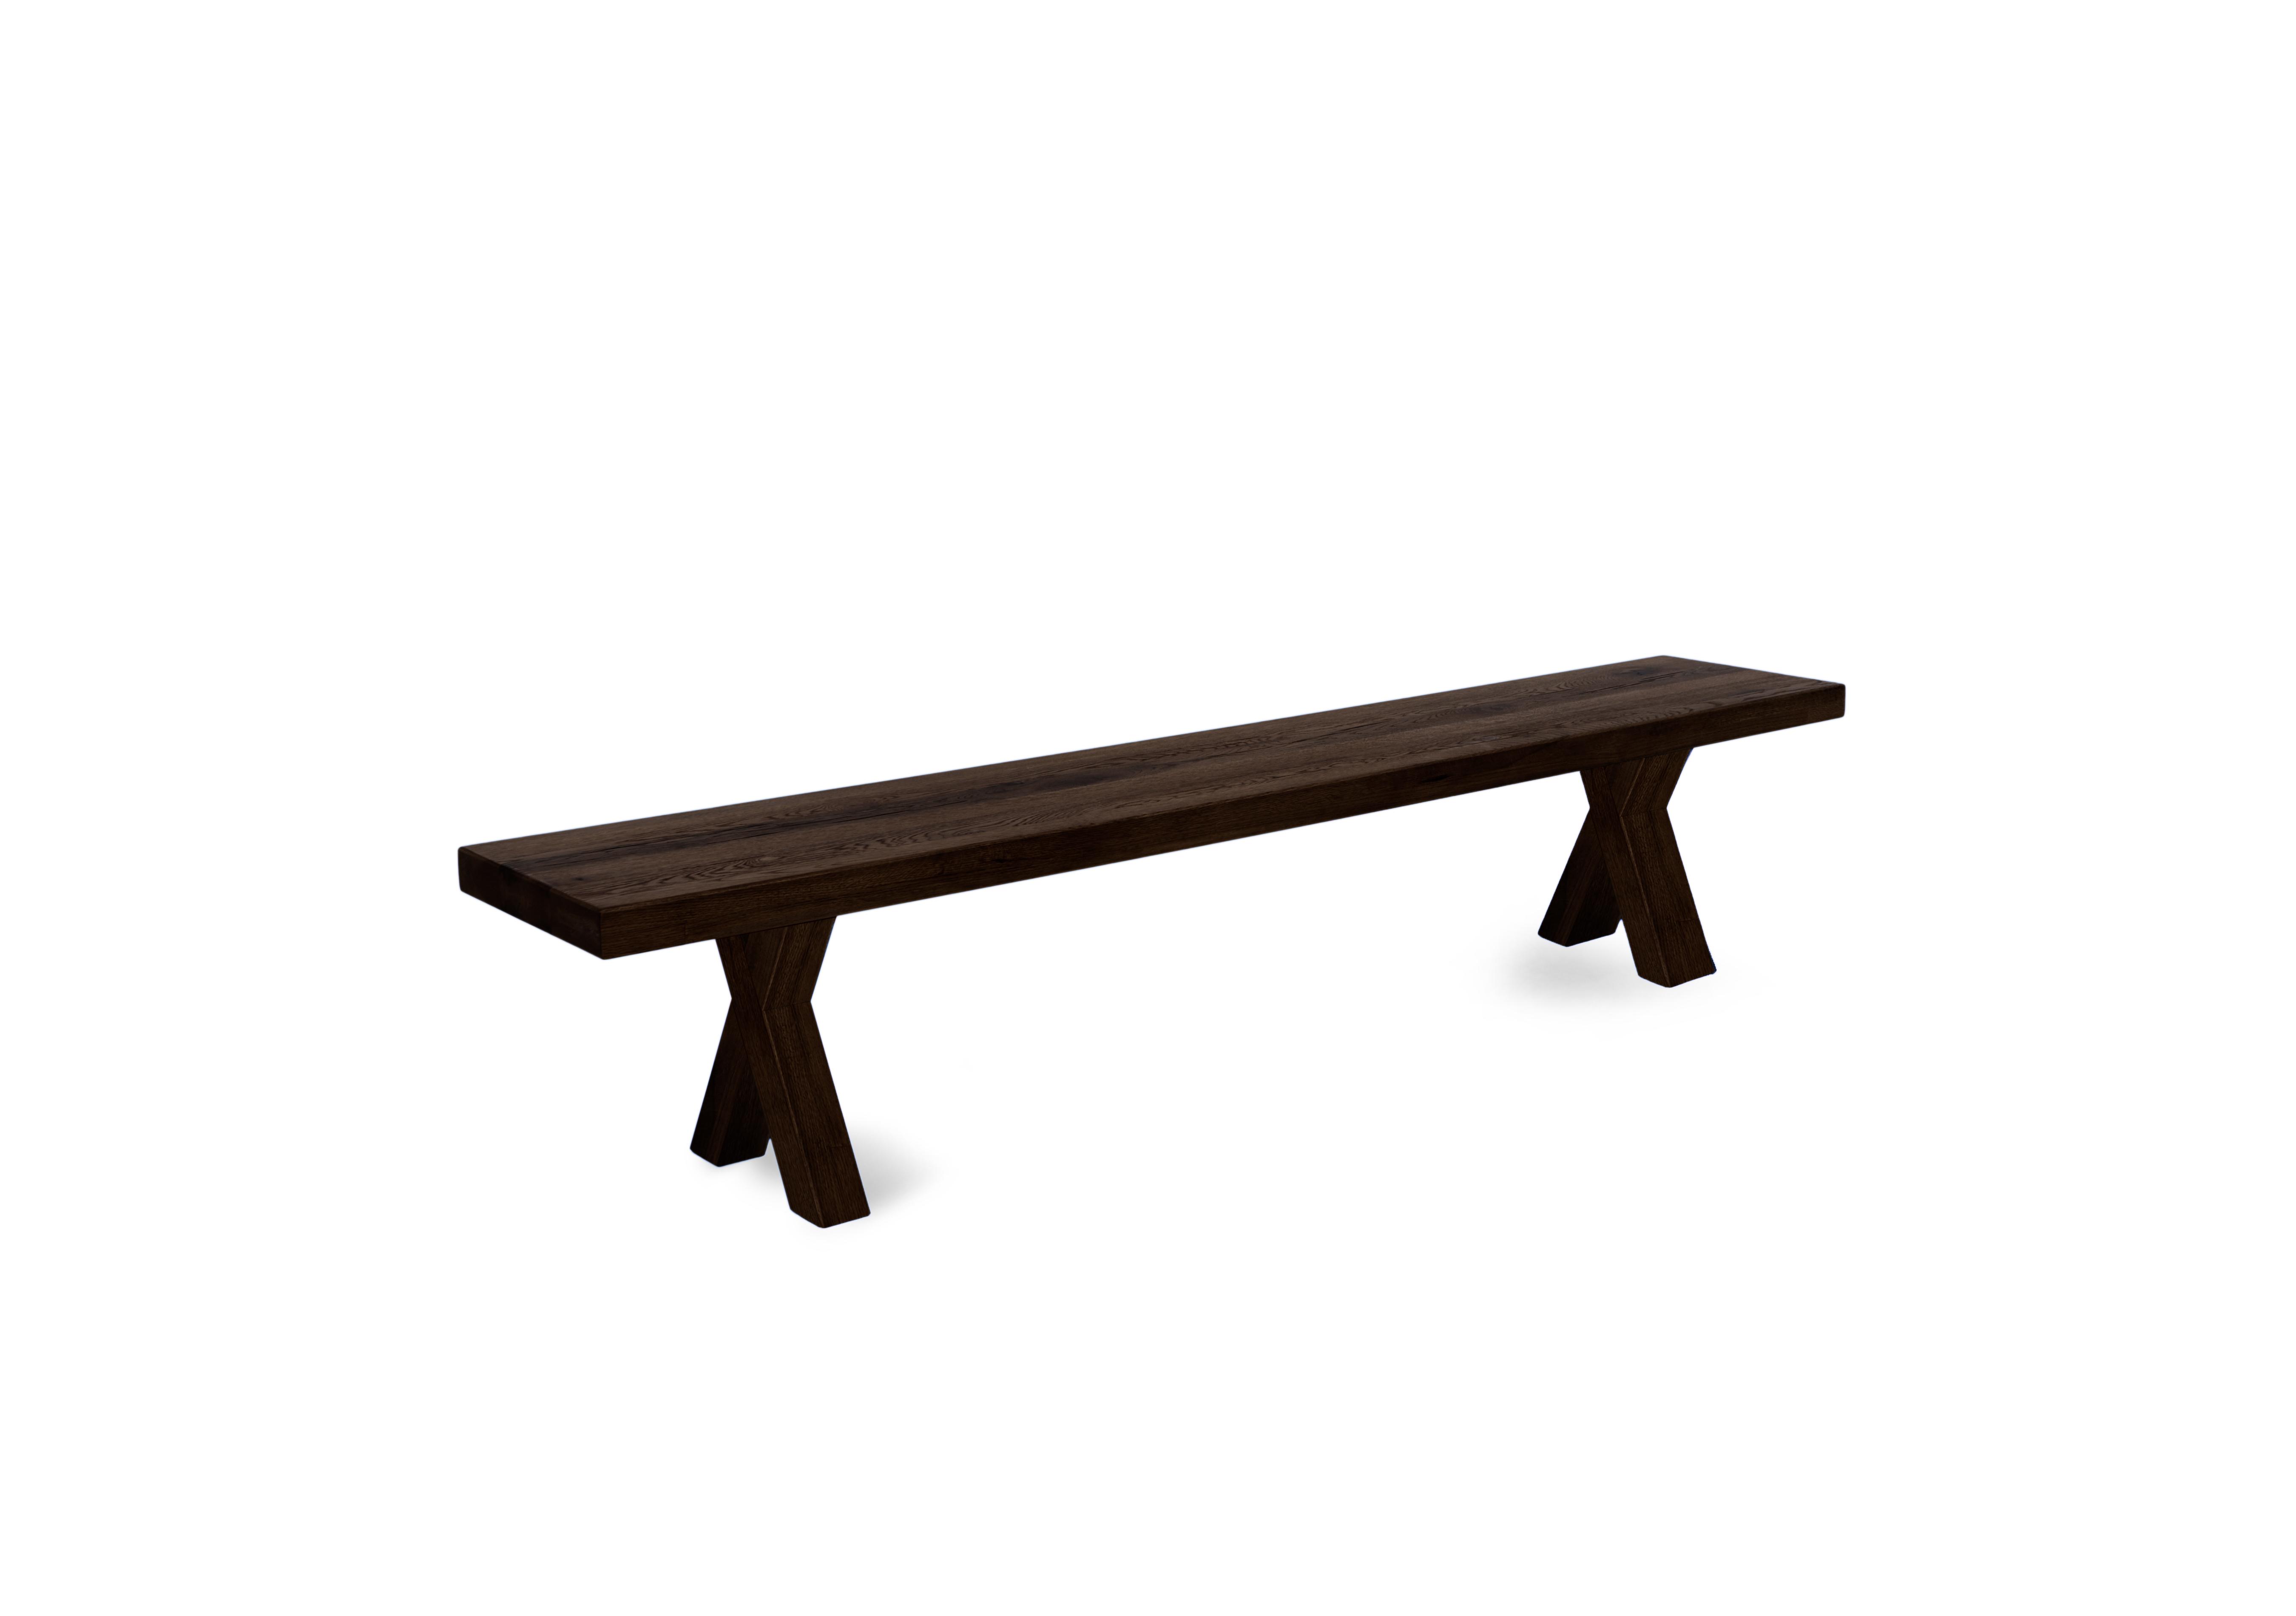 Njord Dining Bench with Wood X-Shaped Legs in Smoked on Furniture Village